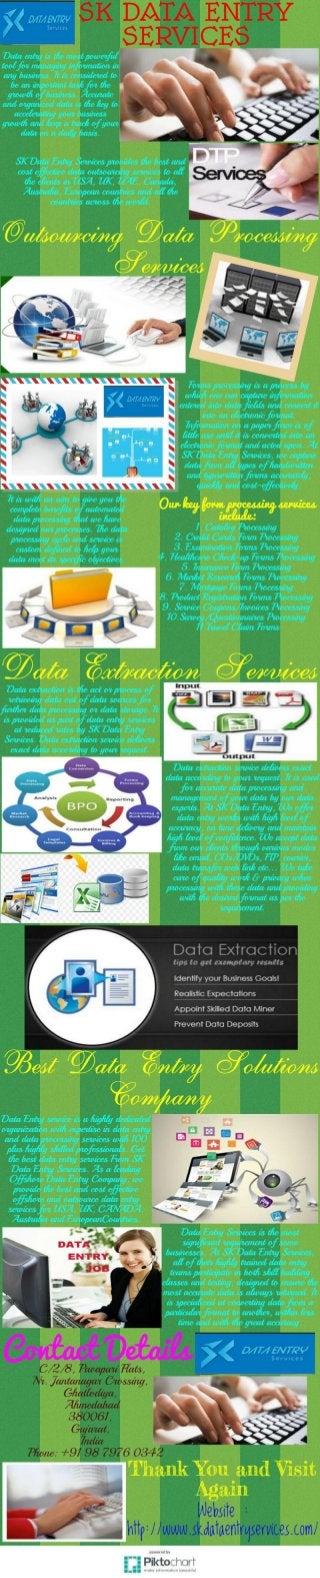 Best outsourcing data processing solutions company